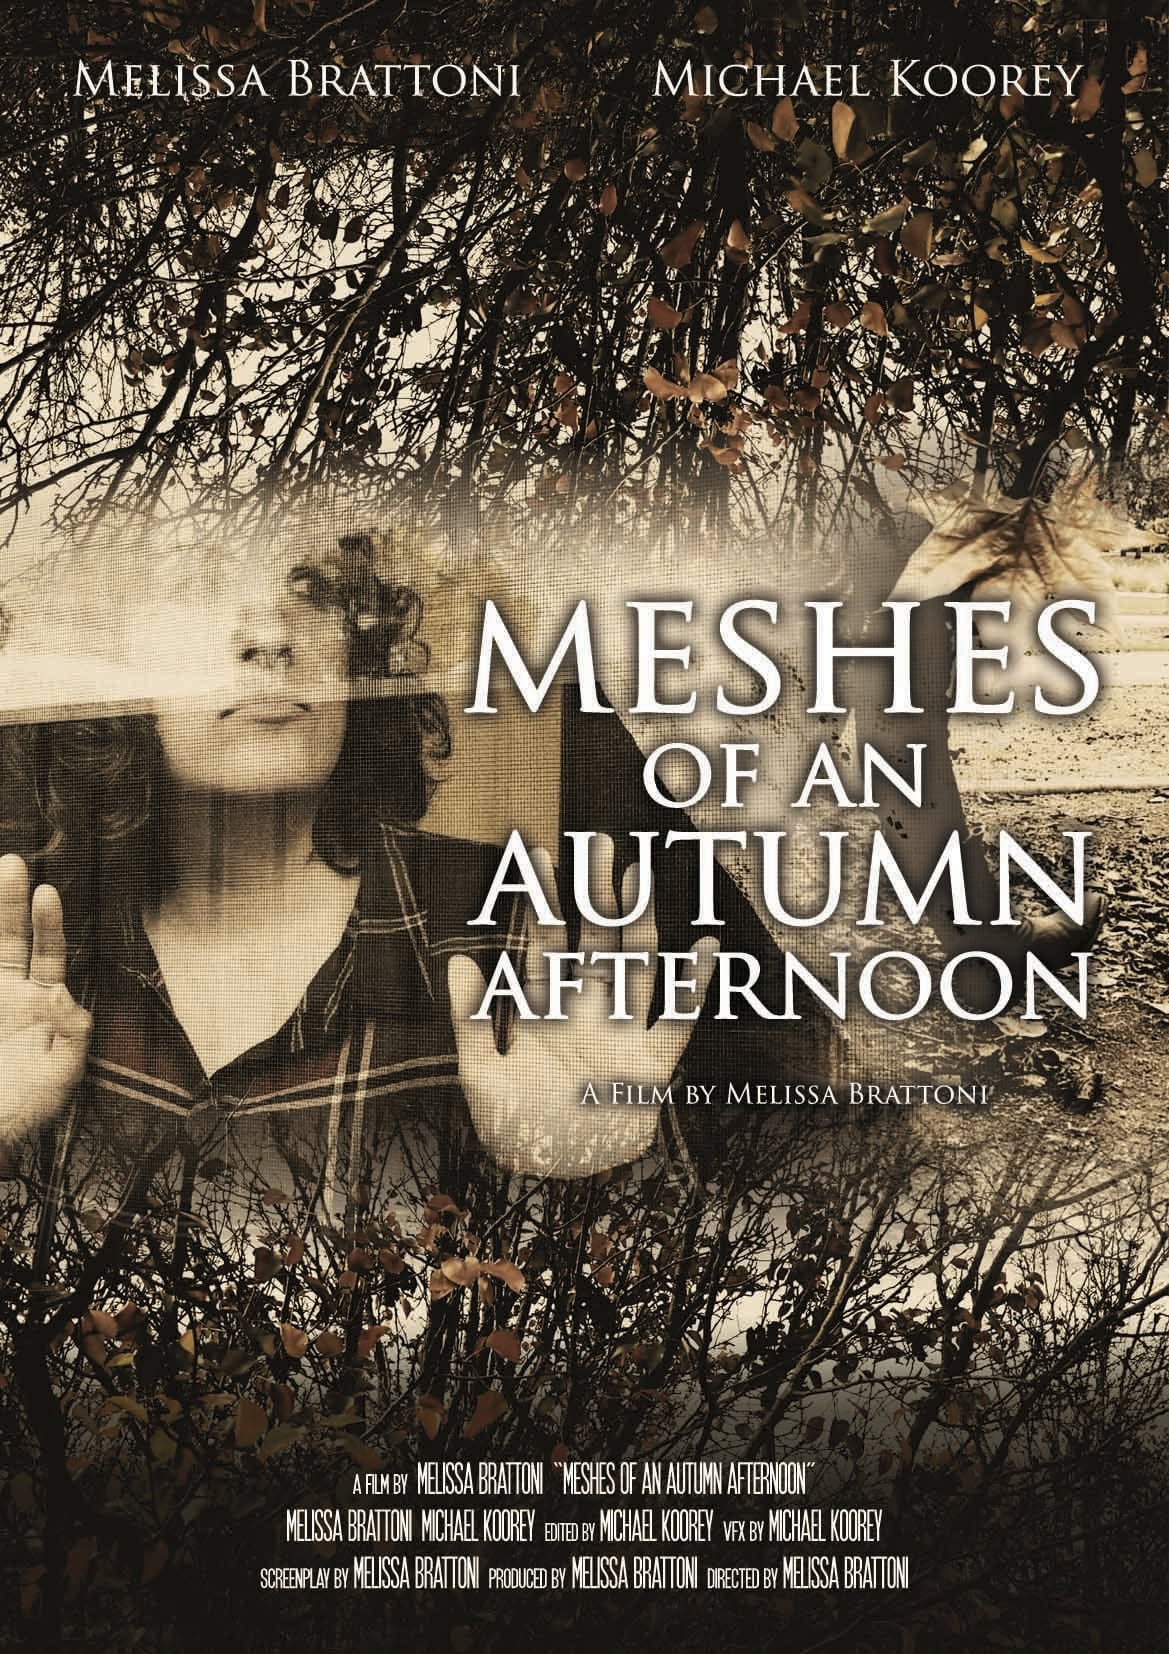 Meshes of an Autumn Afternoon